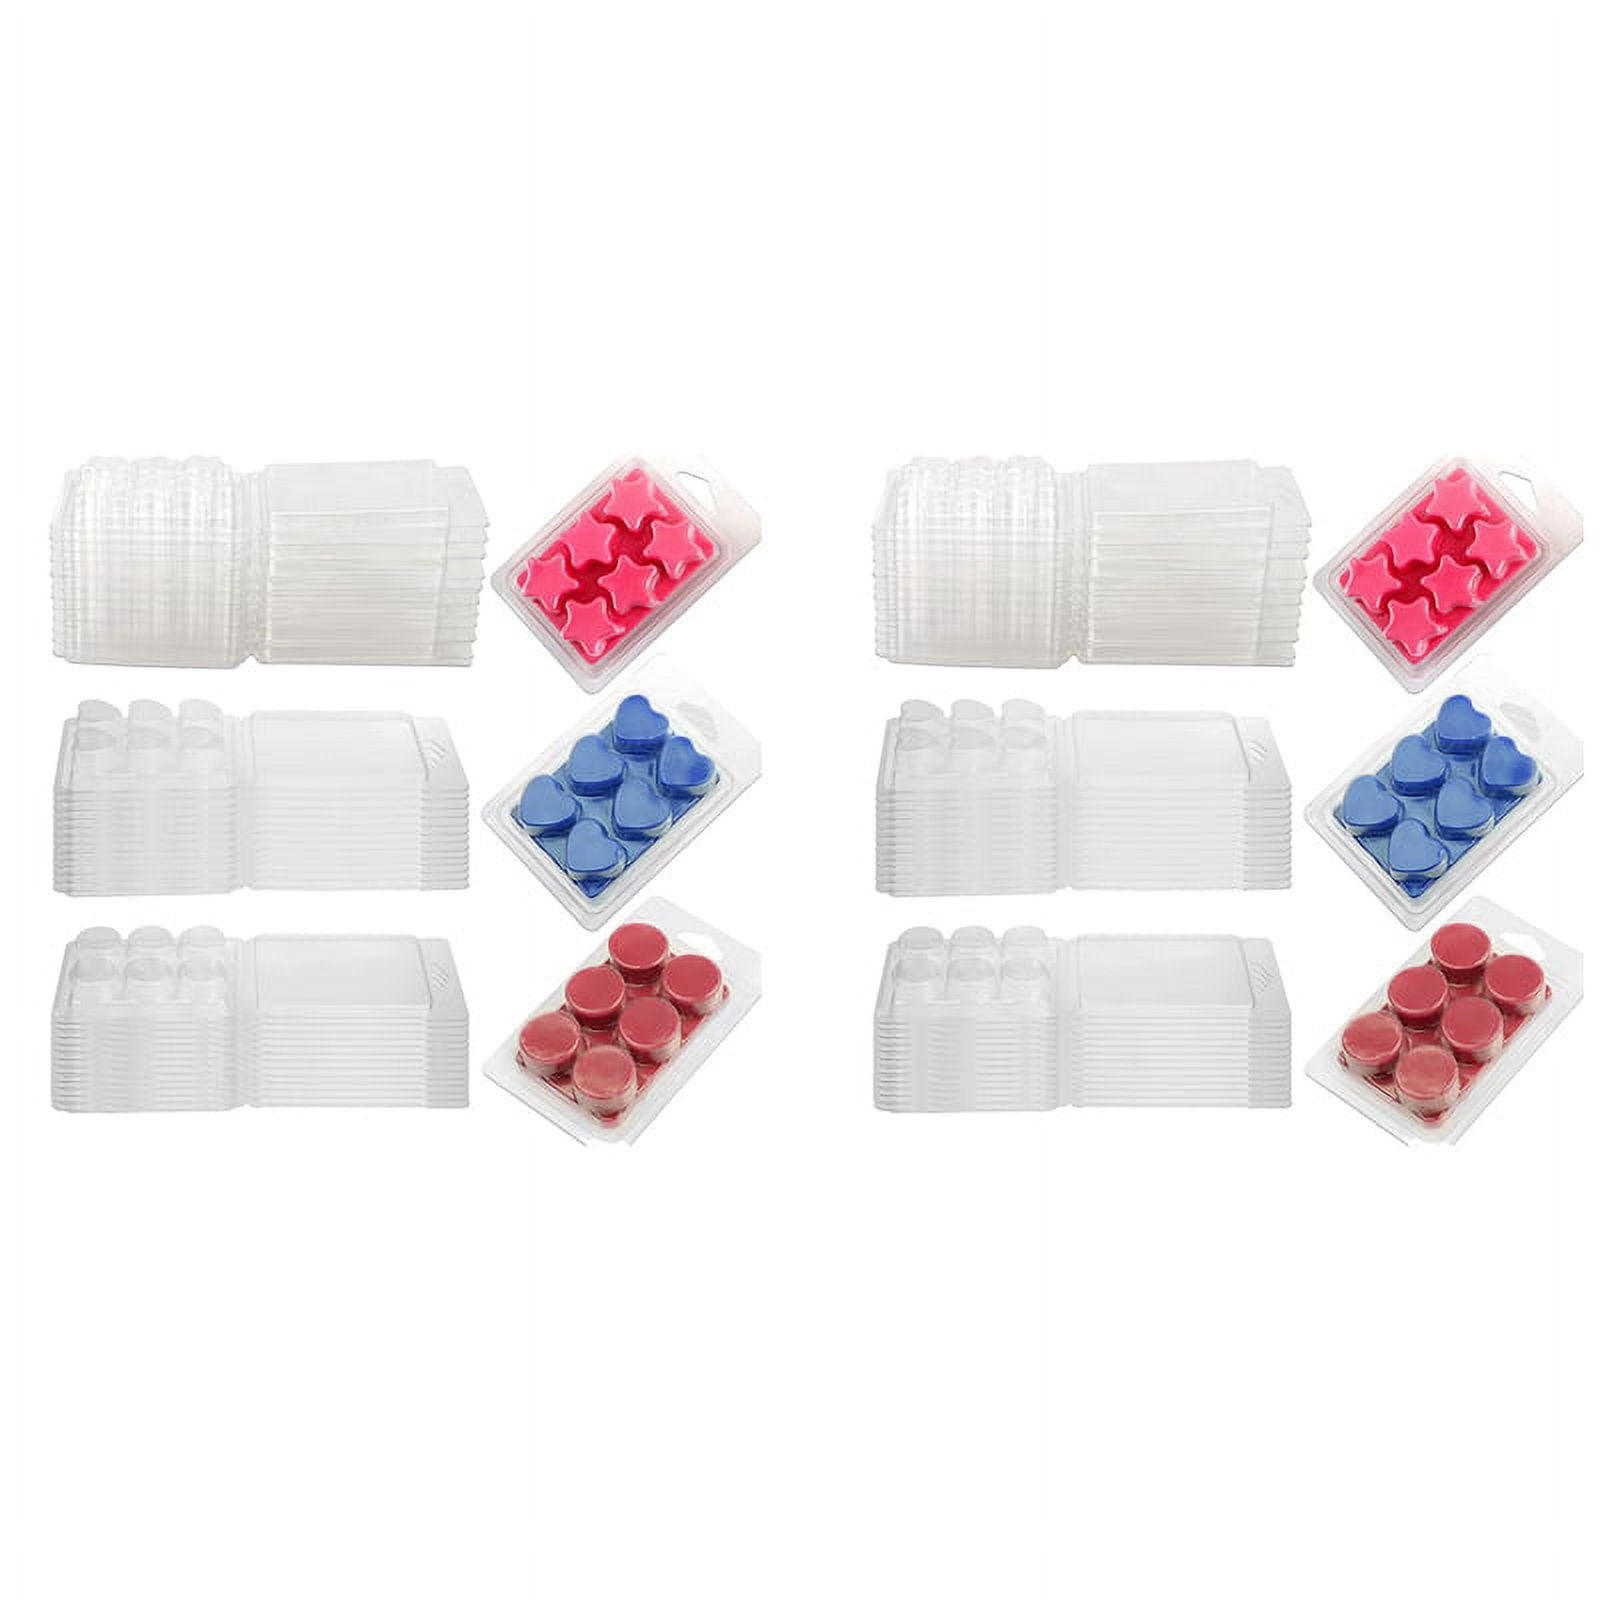 Tyler Candle Mixer Melts, Diva, Set of 8 Scented Wax Tarts for Wax Warmers,  Bundle with a Lumintrail Stain Remover Pen